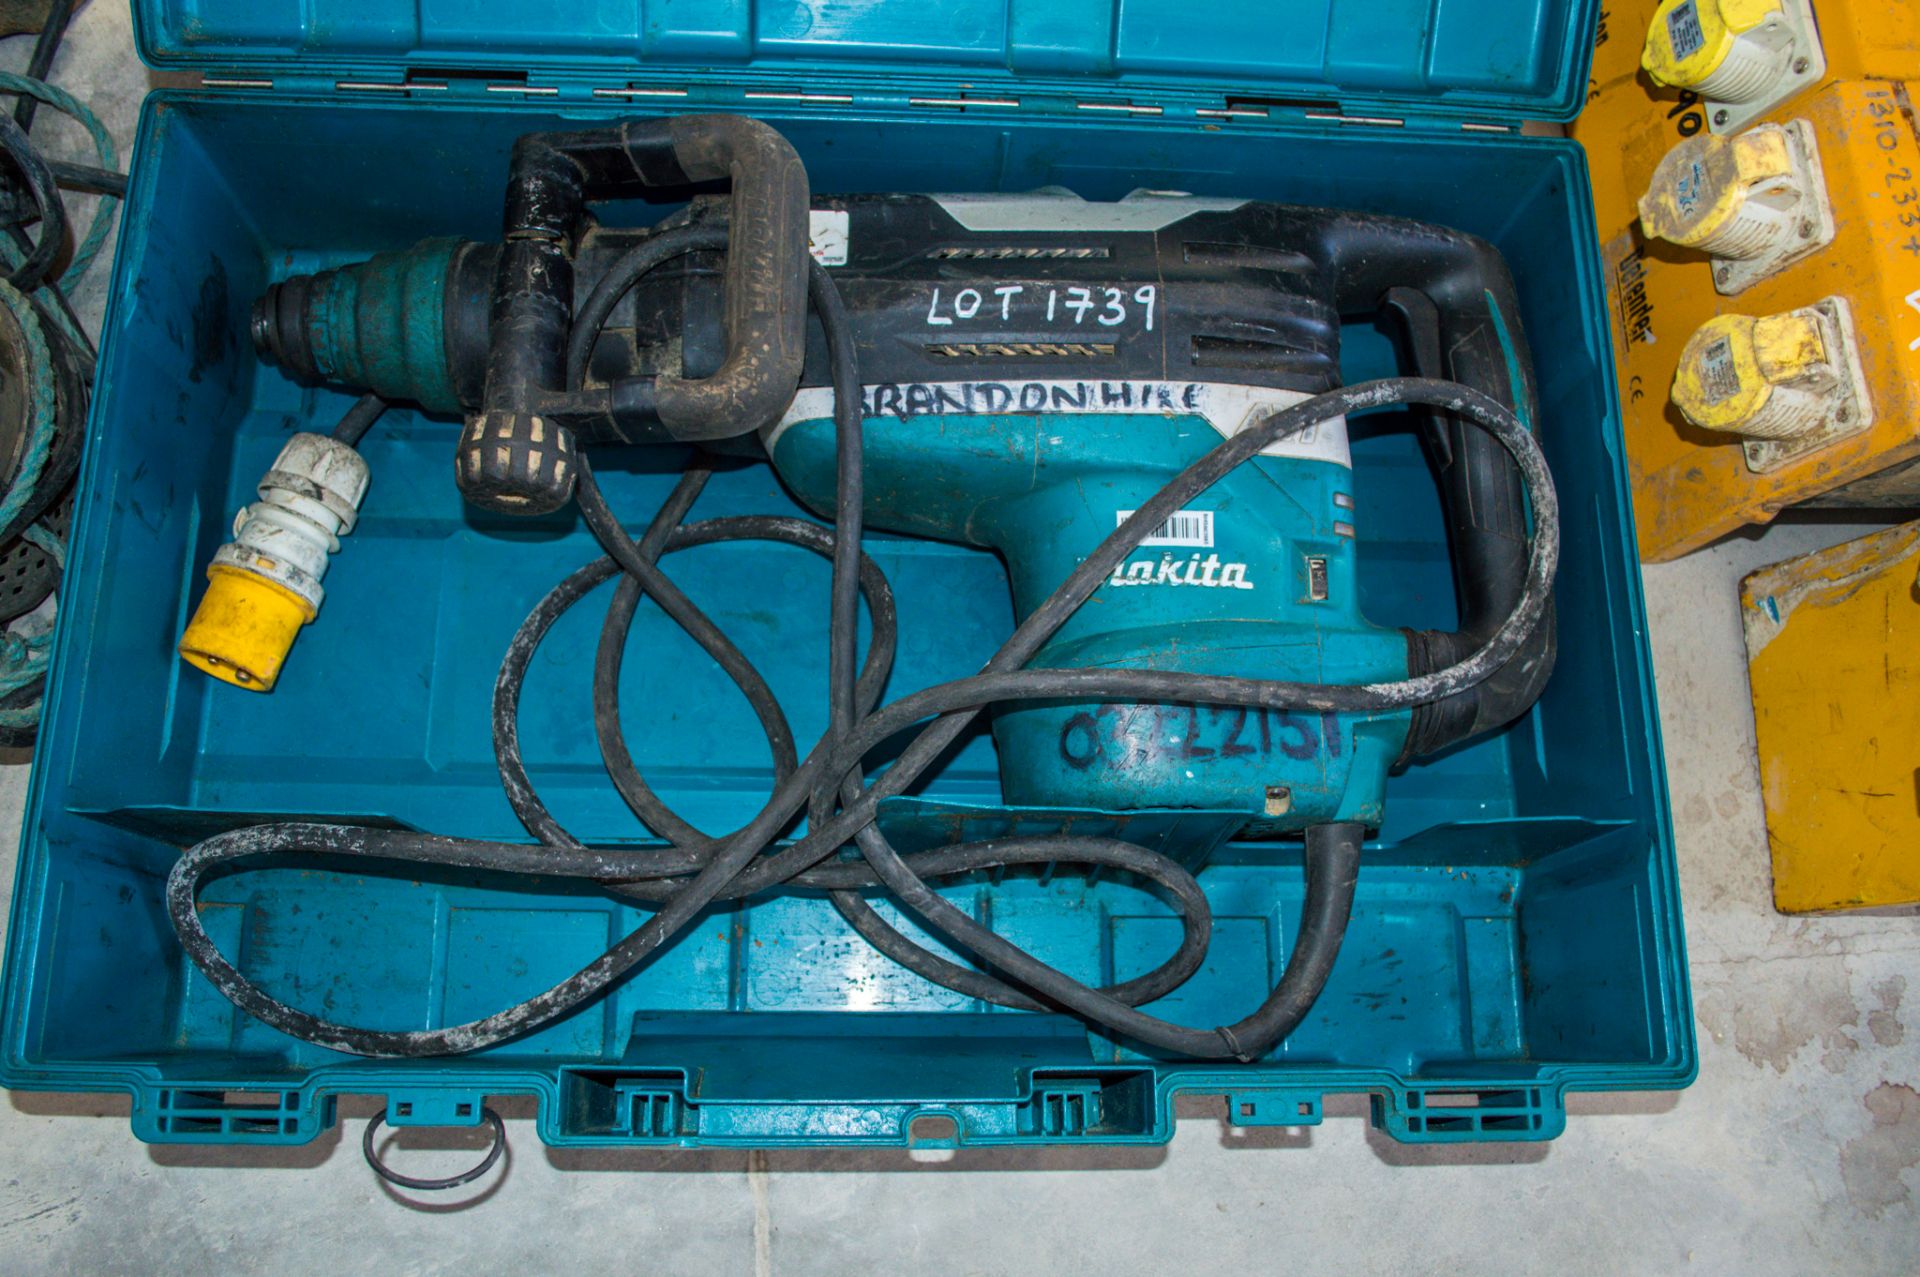 Makita HR5212C 110v SDS rotary hammer drill c/w carry case 03222151 ** Chuck cover missing **